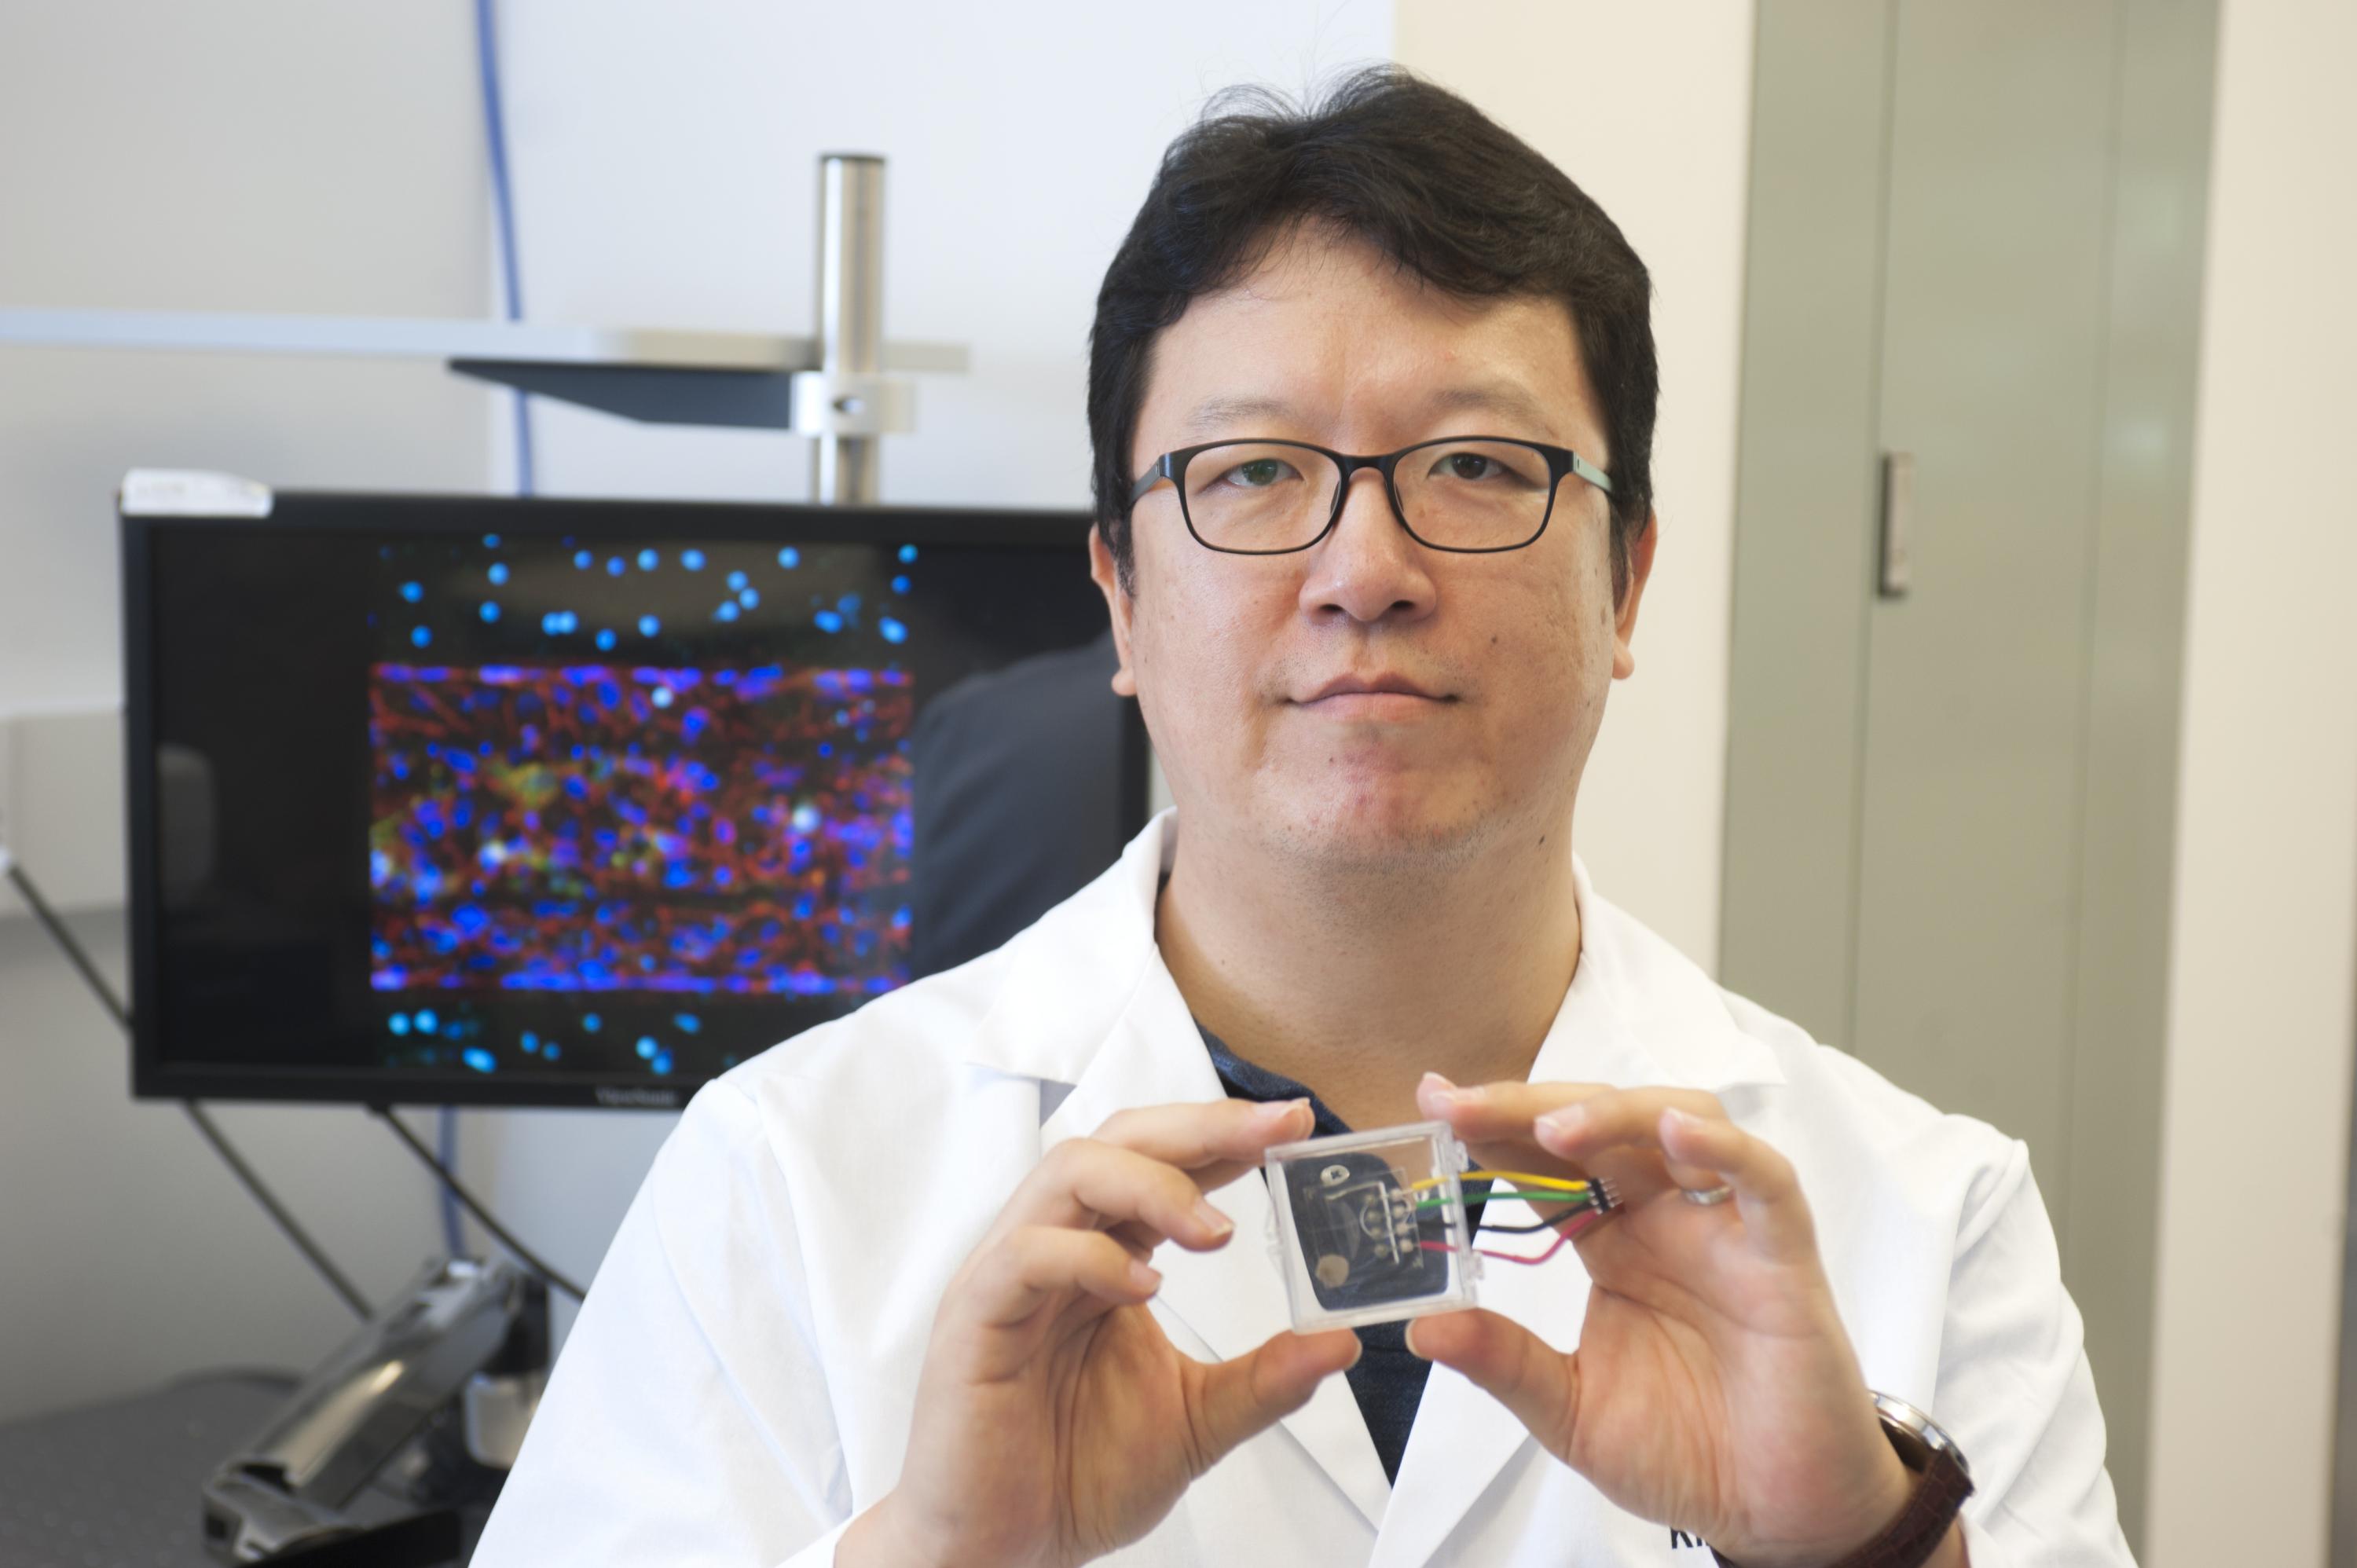 Georgia Tech biomedical engineering researcher YongTae "Tony" Kim led the development of the blood-brain-barrier on a chip. Here, be is holding up a microfluidic device that mimics a microvessel from other research. Kim is the recipient of the esteemed NIH Director's New Innovator Award for his proposal on high-throughput research to tackle new possible new treatments for atherosclerosis. Kim is also developing a human-coronary-artery-on-a-chip. Credit: Georgia Tech / Christopher Moore